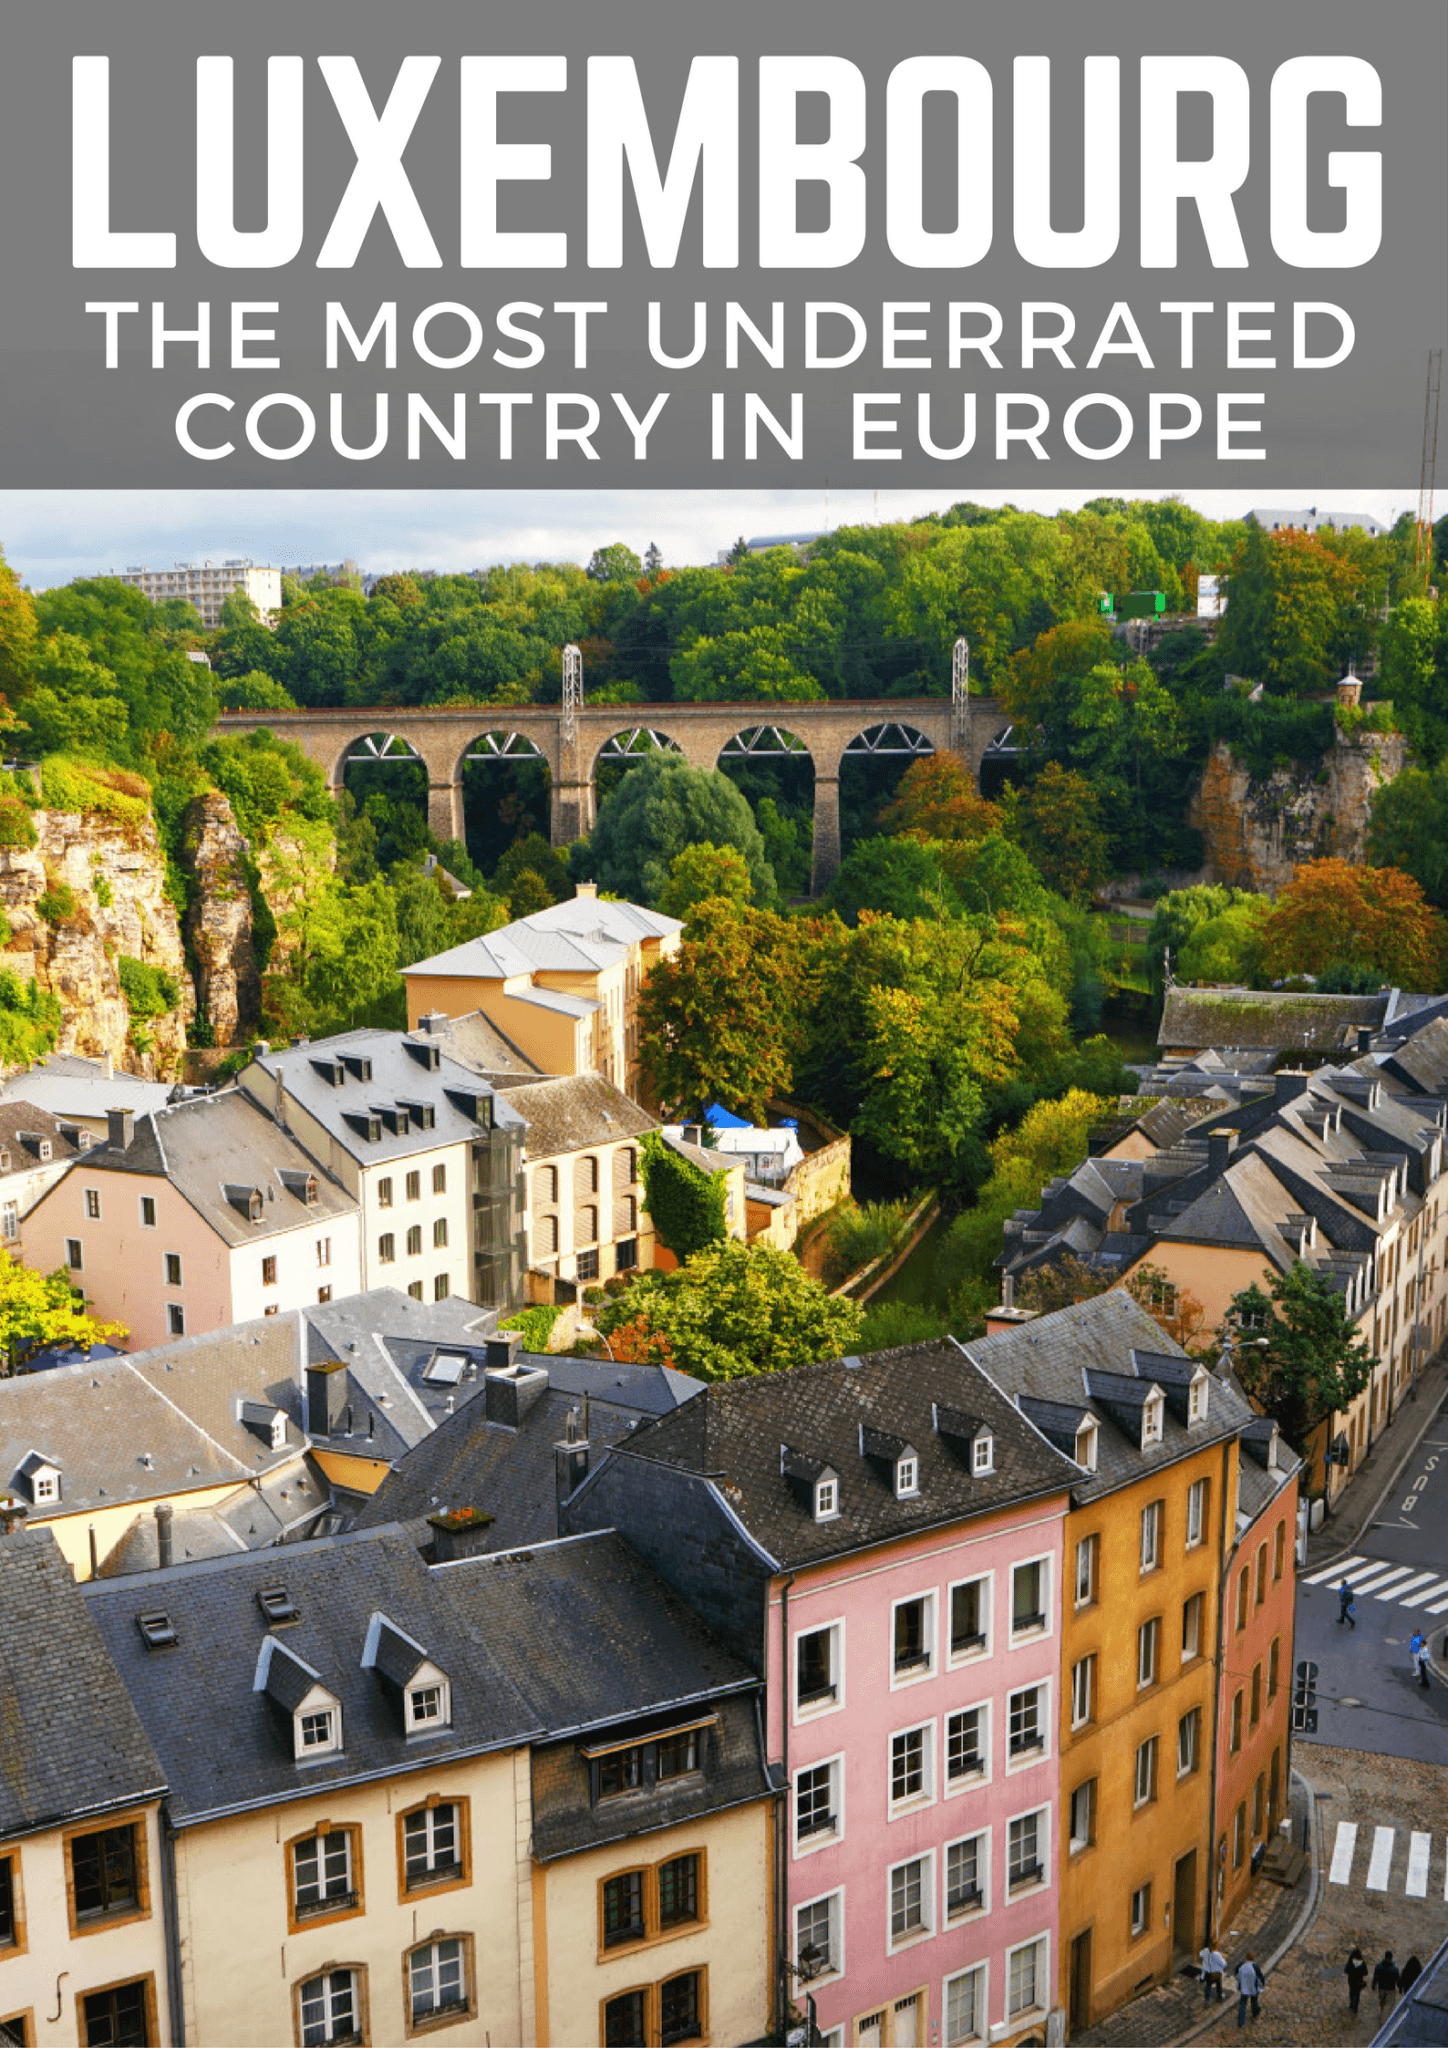 Why Luxembourg is one of the best countries in Europe!